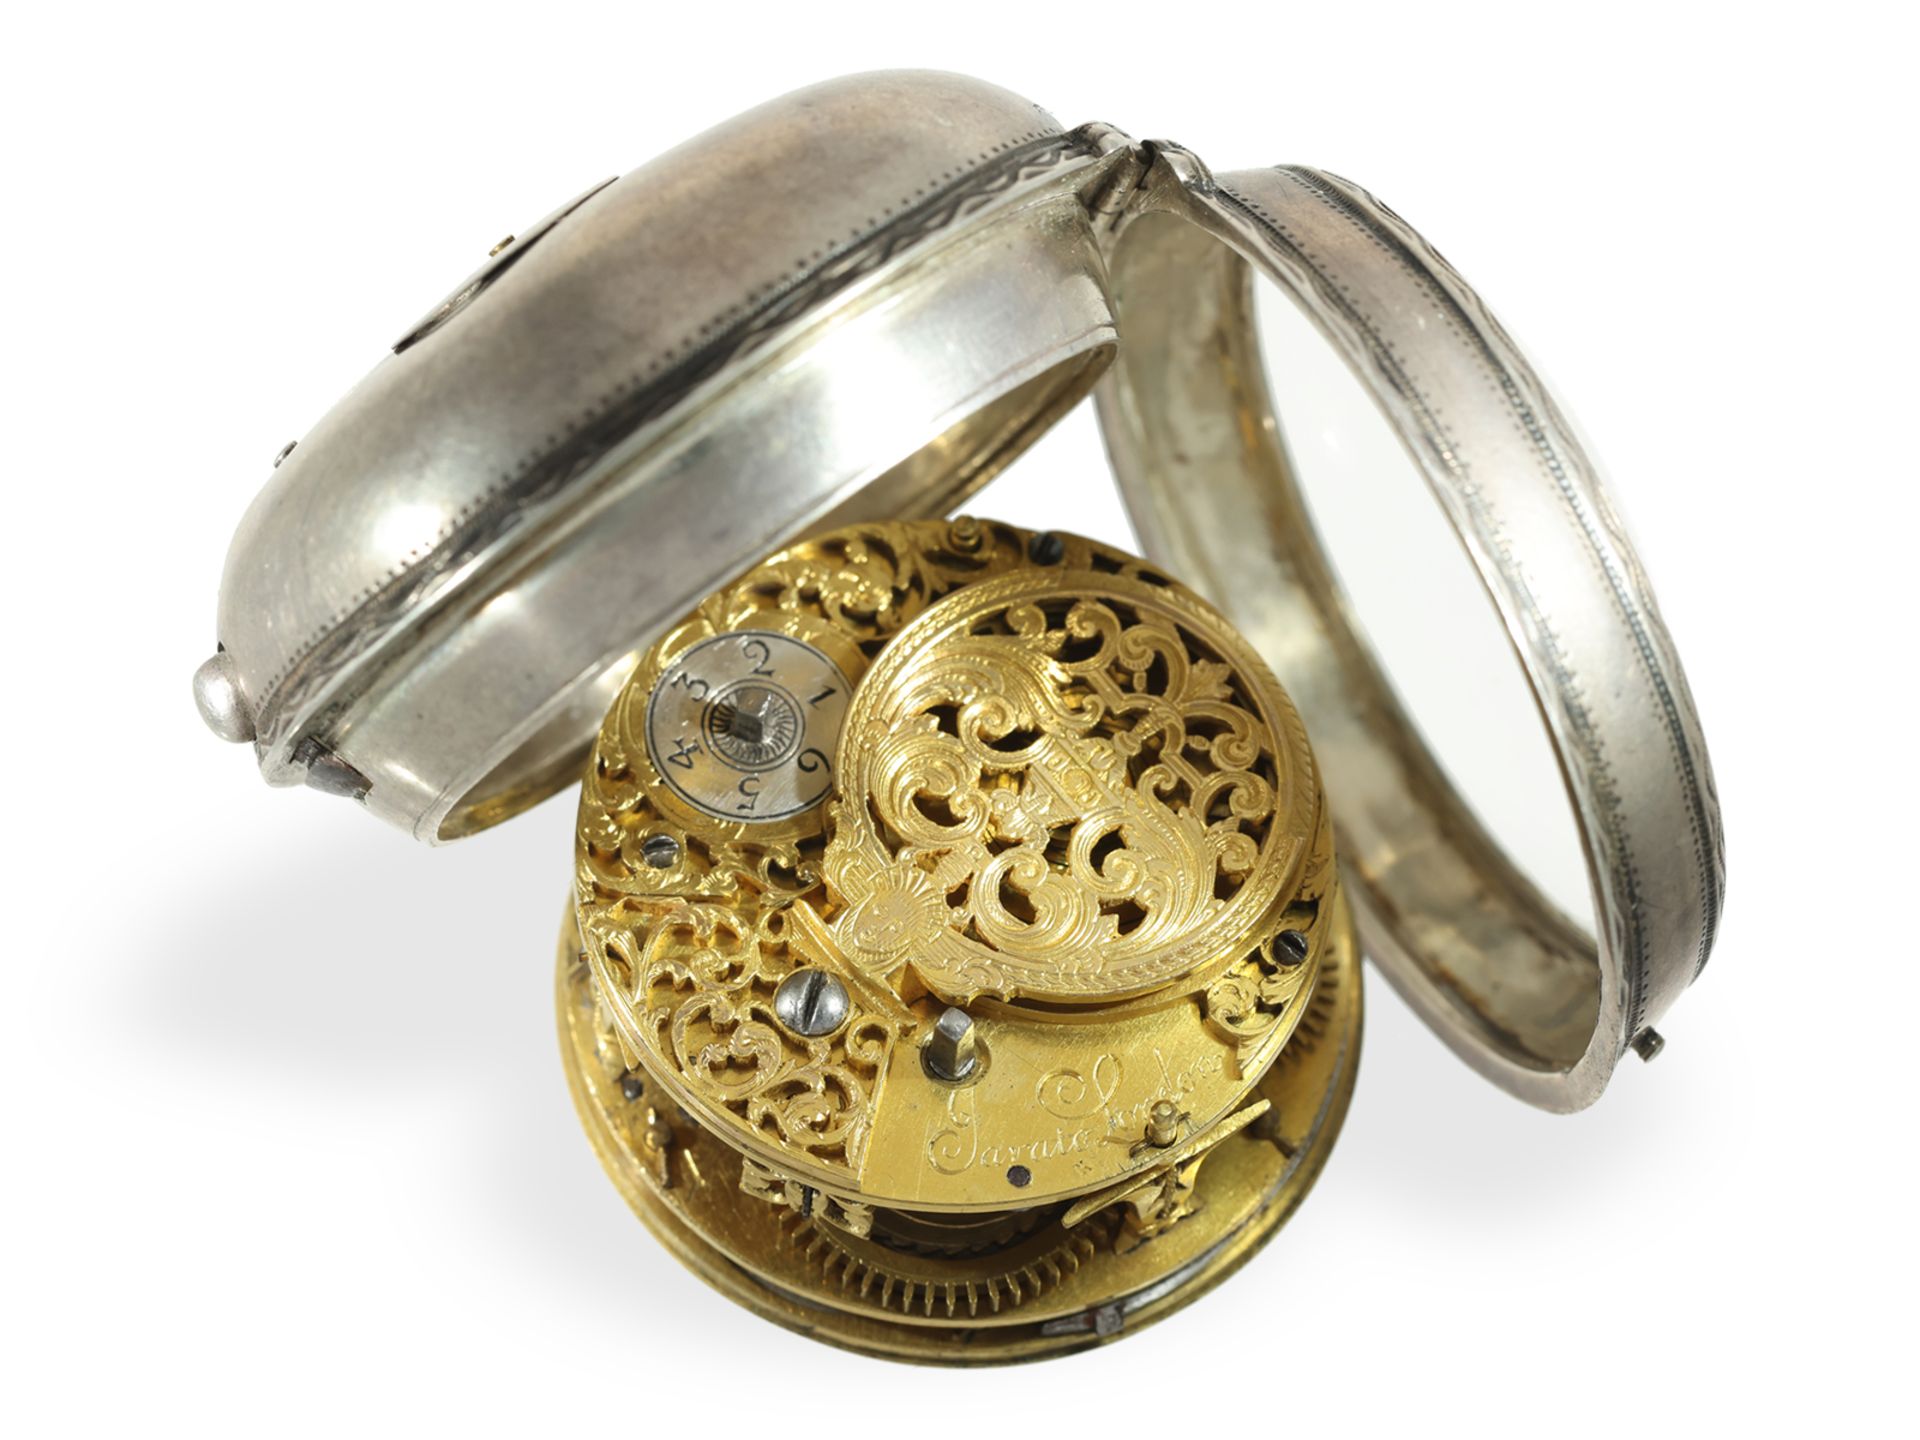 Pocket watch: museum astronomical verge watch with 6 complications, R. Jarrett London around 1690 - Image 3 of 5